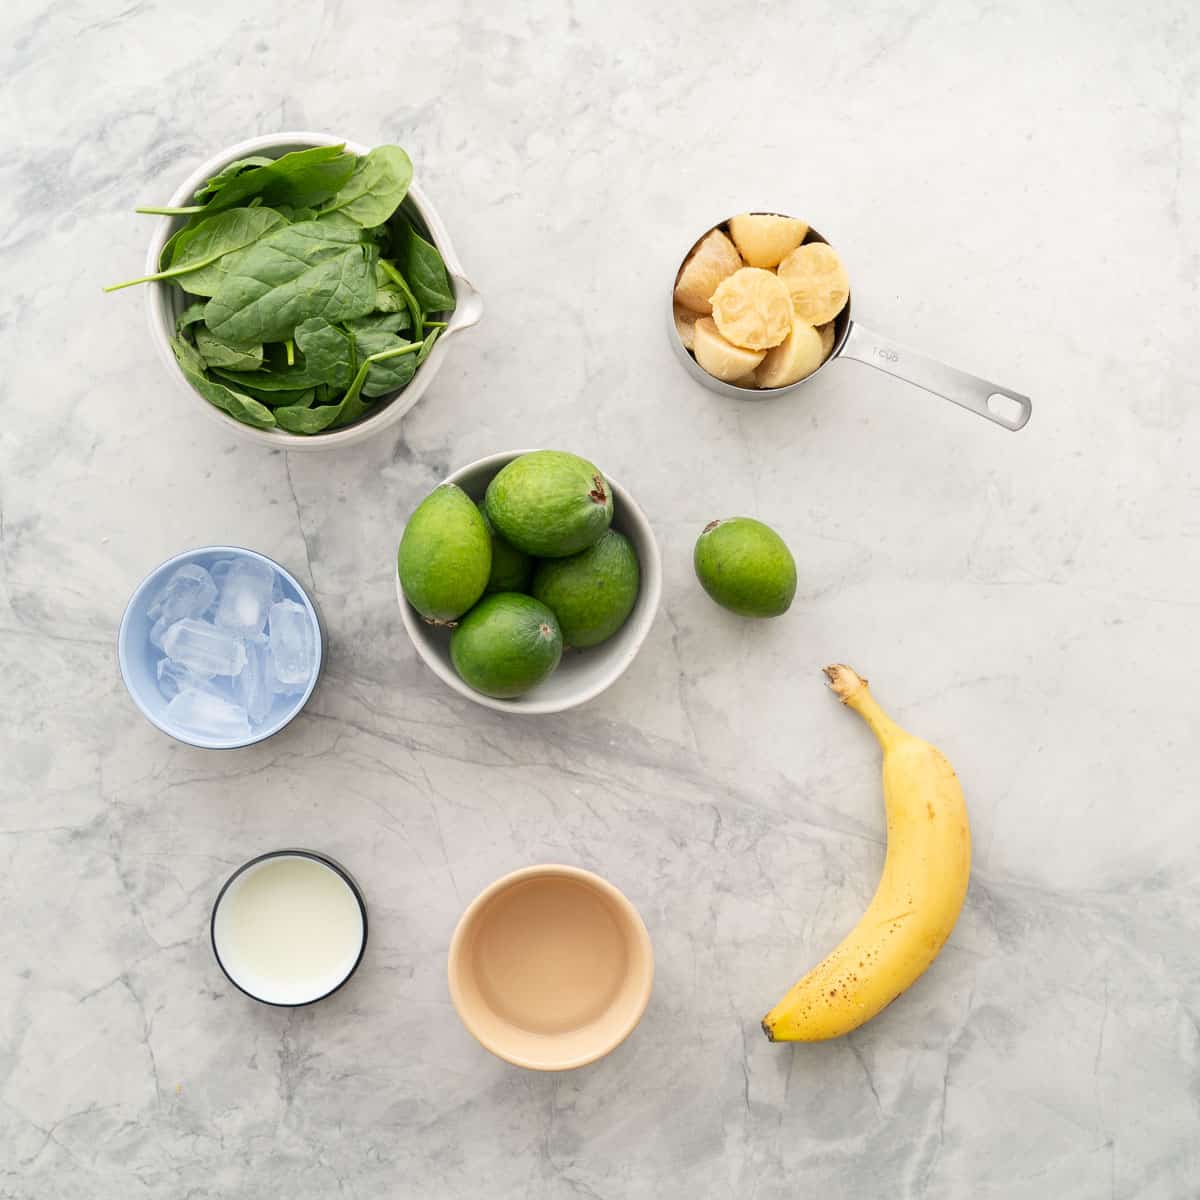 The ingredients to make feijoa smoothie laid out on a bench top.